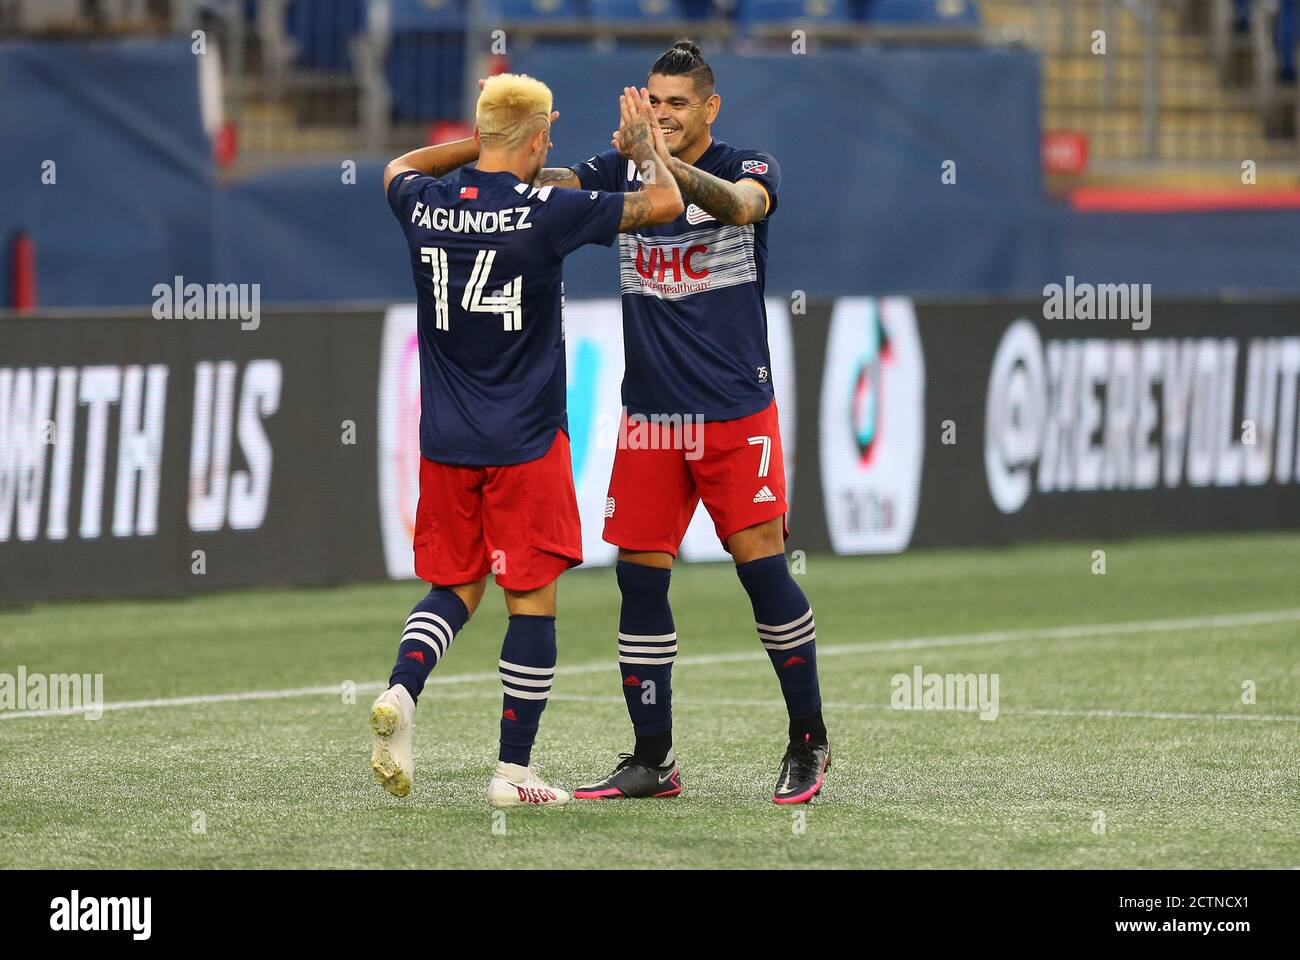 Gillette Stadium. 23rd Sep, 2020. MA, USA; New England Revolution forward Diego Fagundez (14) and New England Revolution forward Gustavo Bou (7) celebrate a goal during a MLS match between Montreal Impact and New England Revolution at Gillette Stadium. Anthony Nesmith/CSM/Alamy Live News Stock Photo